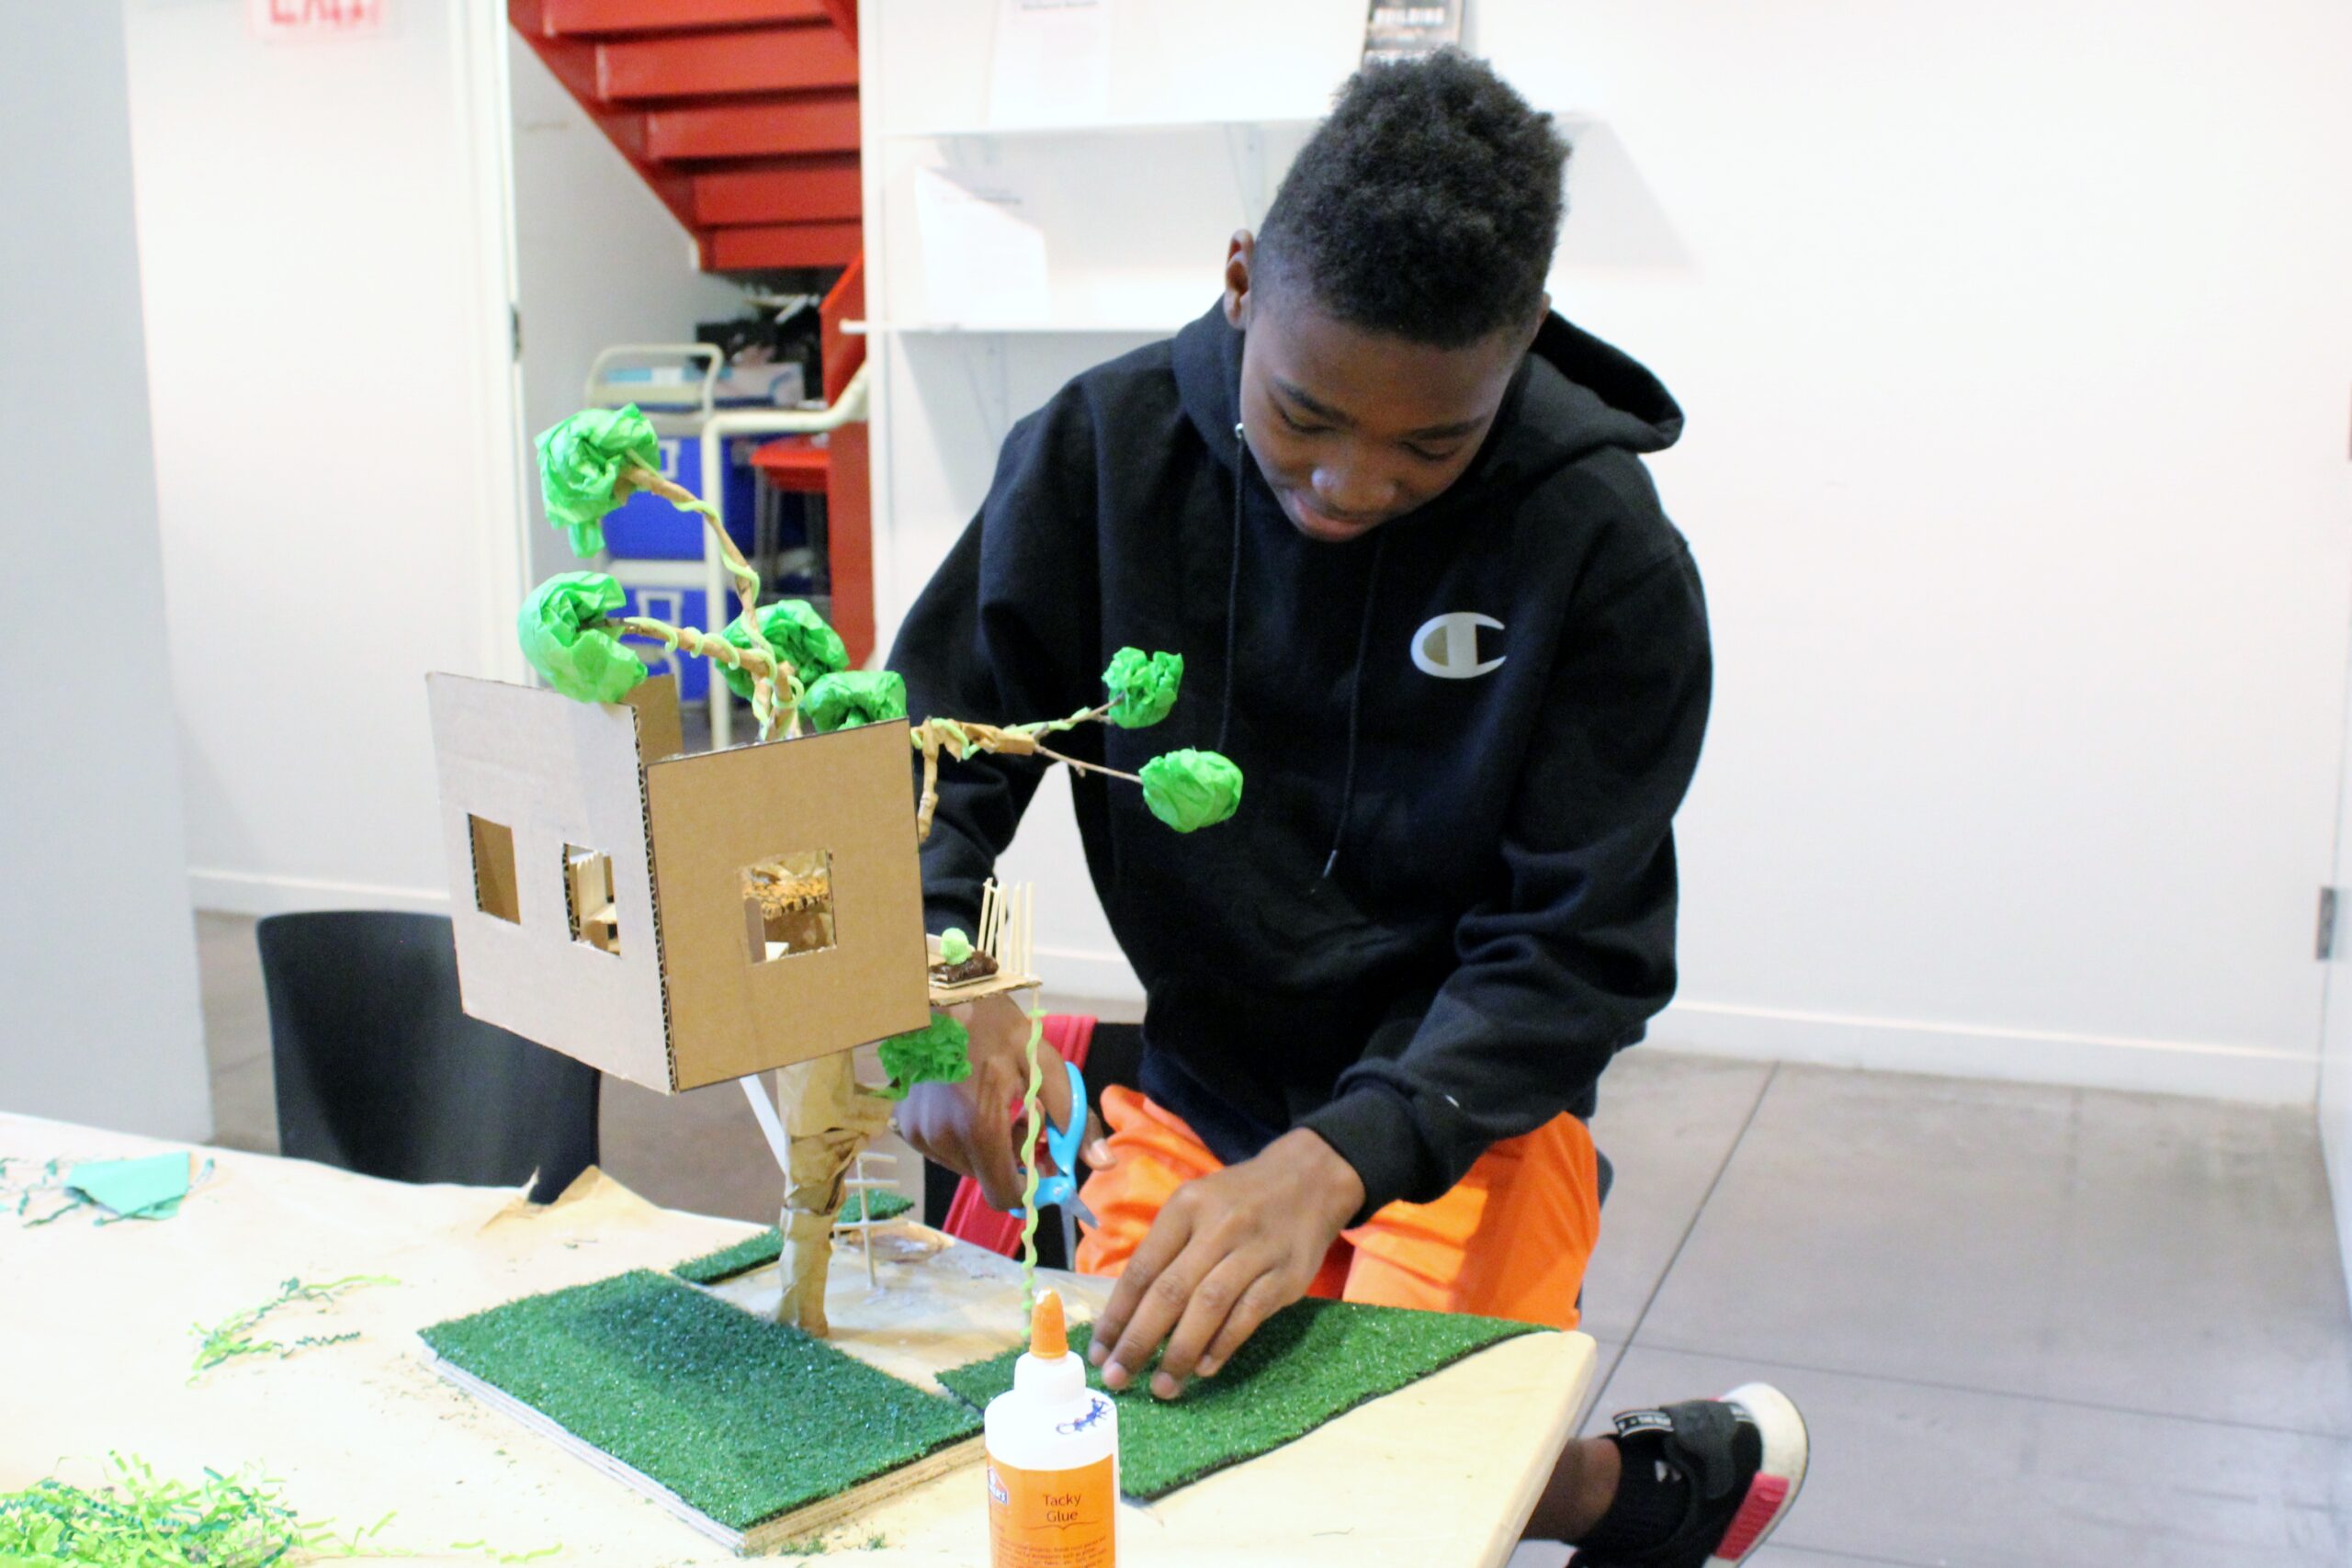 Middle school student working on treehouse model